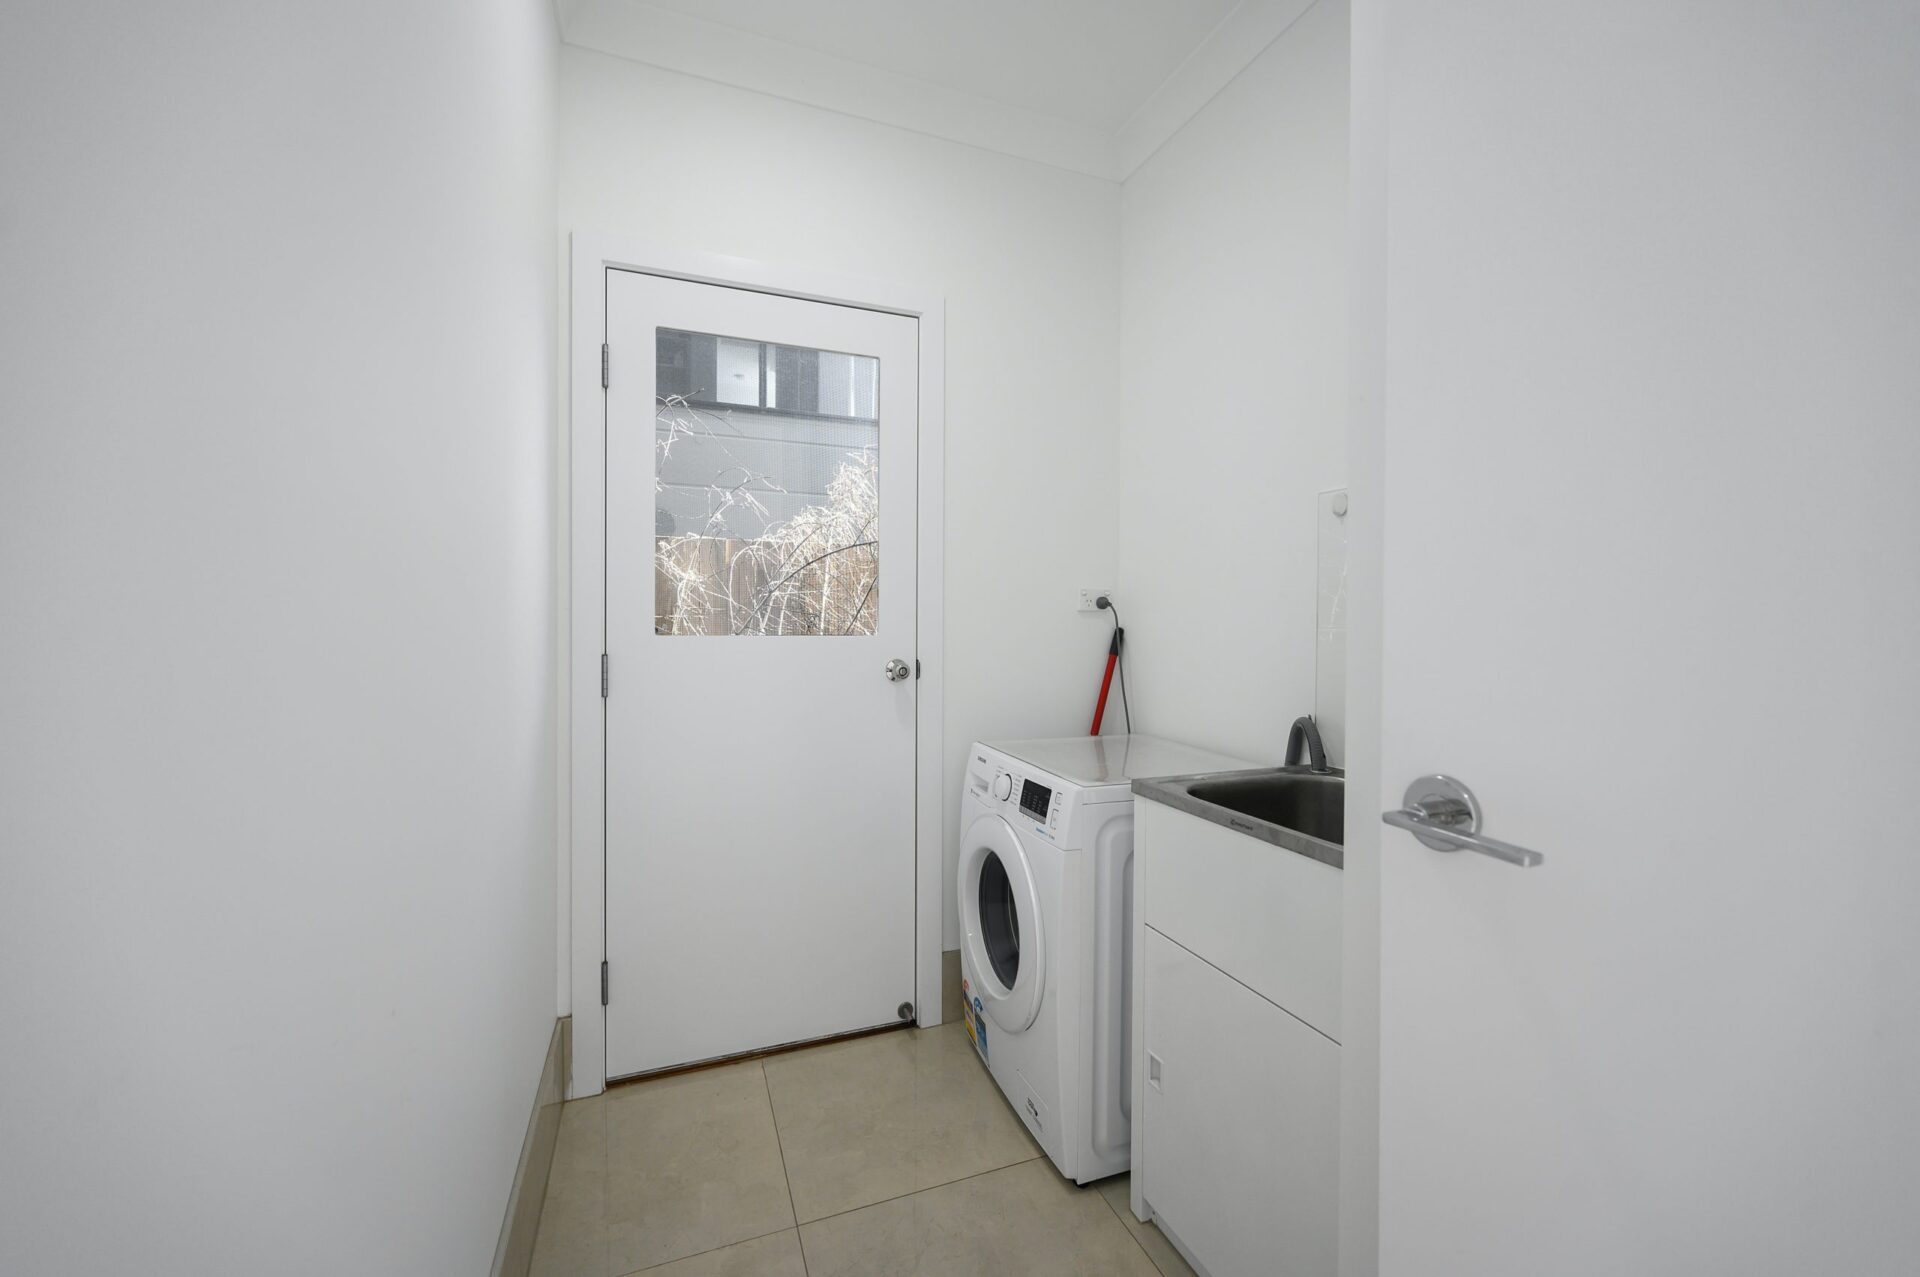 Clean and bright white laundry area with a minimalist design